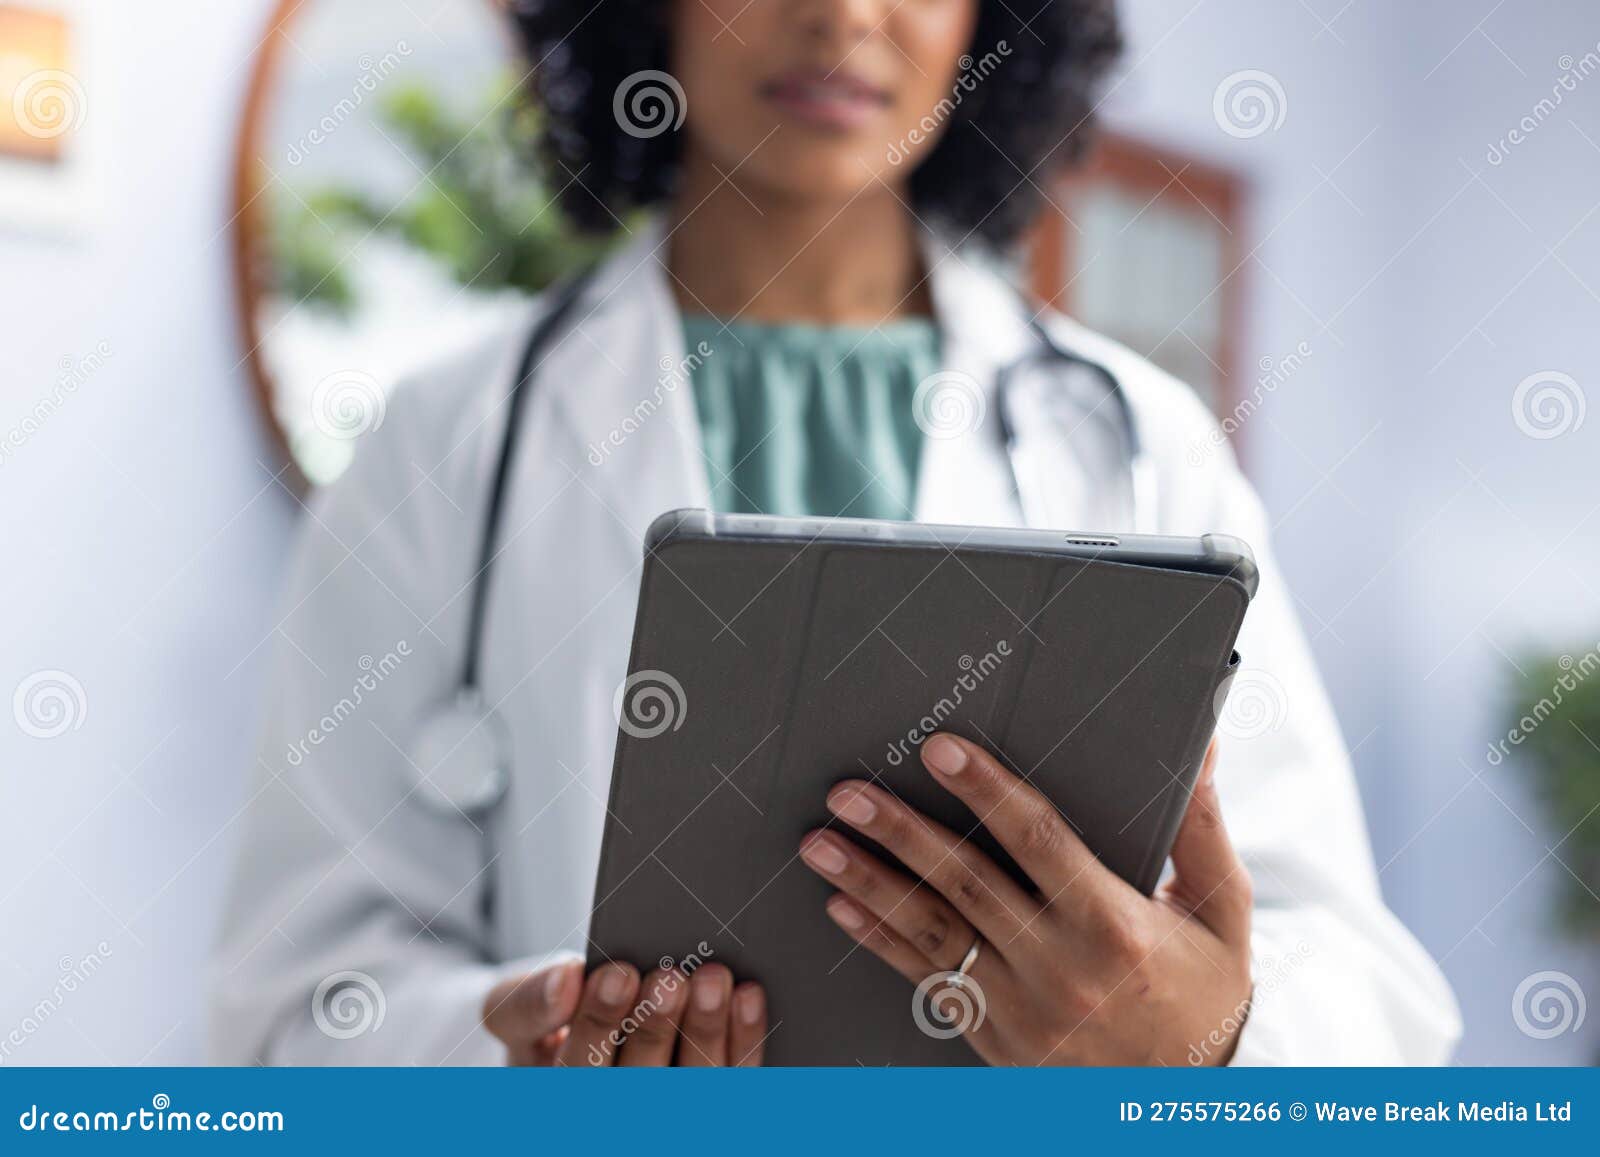 biracial female doctor wearing sthethoscope, using tablet at doctor's office